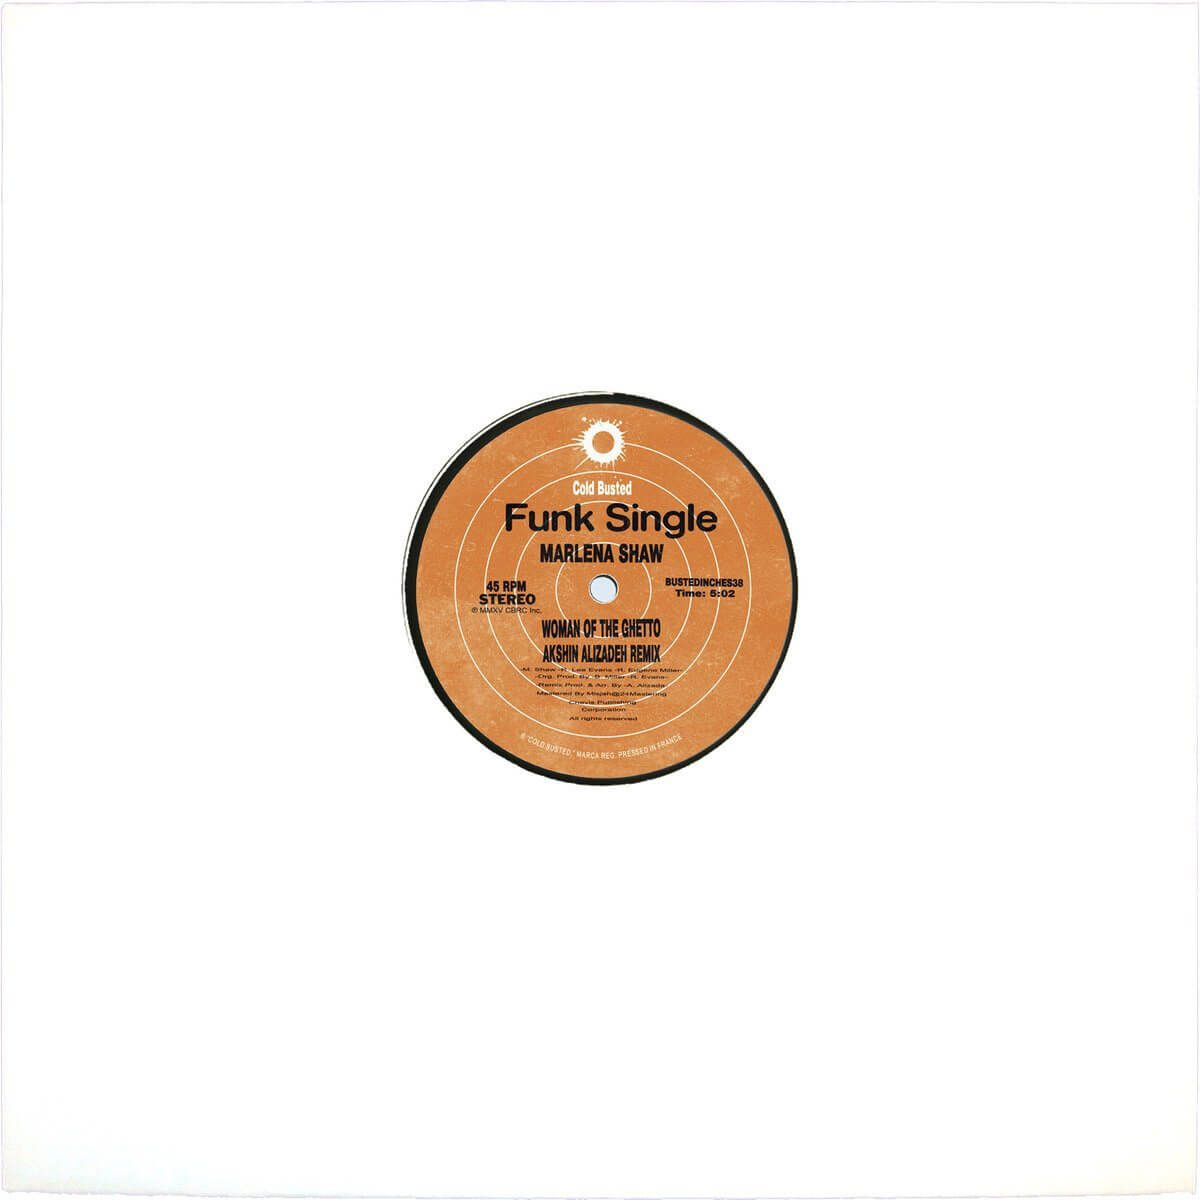 Marlena Shaw - Woman of the Ghetto (Akshin Alizadeh Mixes) - Limited Edition 12 Inch Vinyl (6th Pressing) - Cold Busted